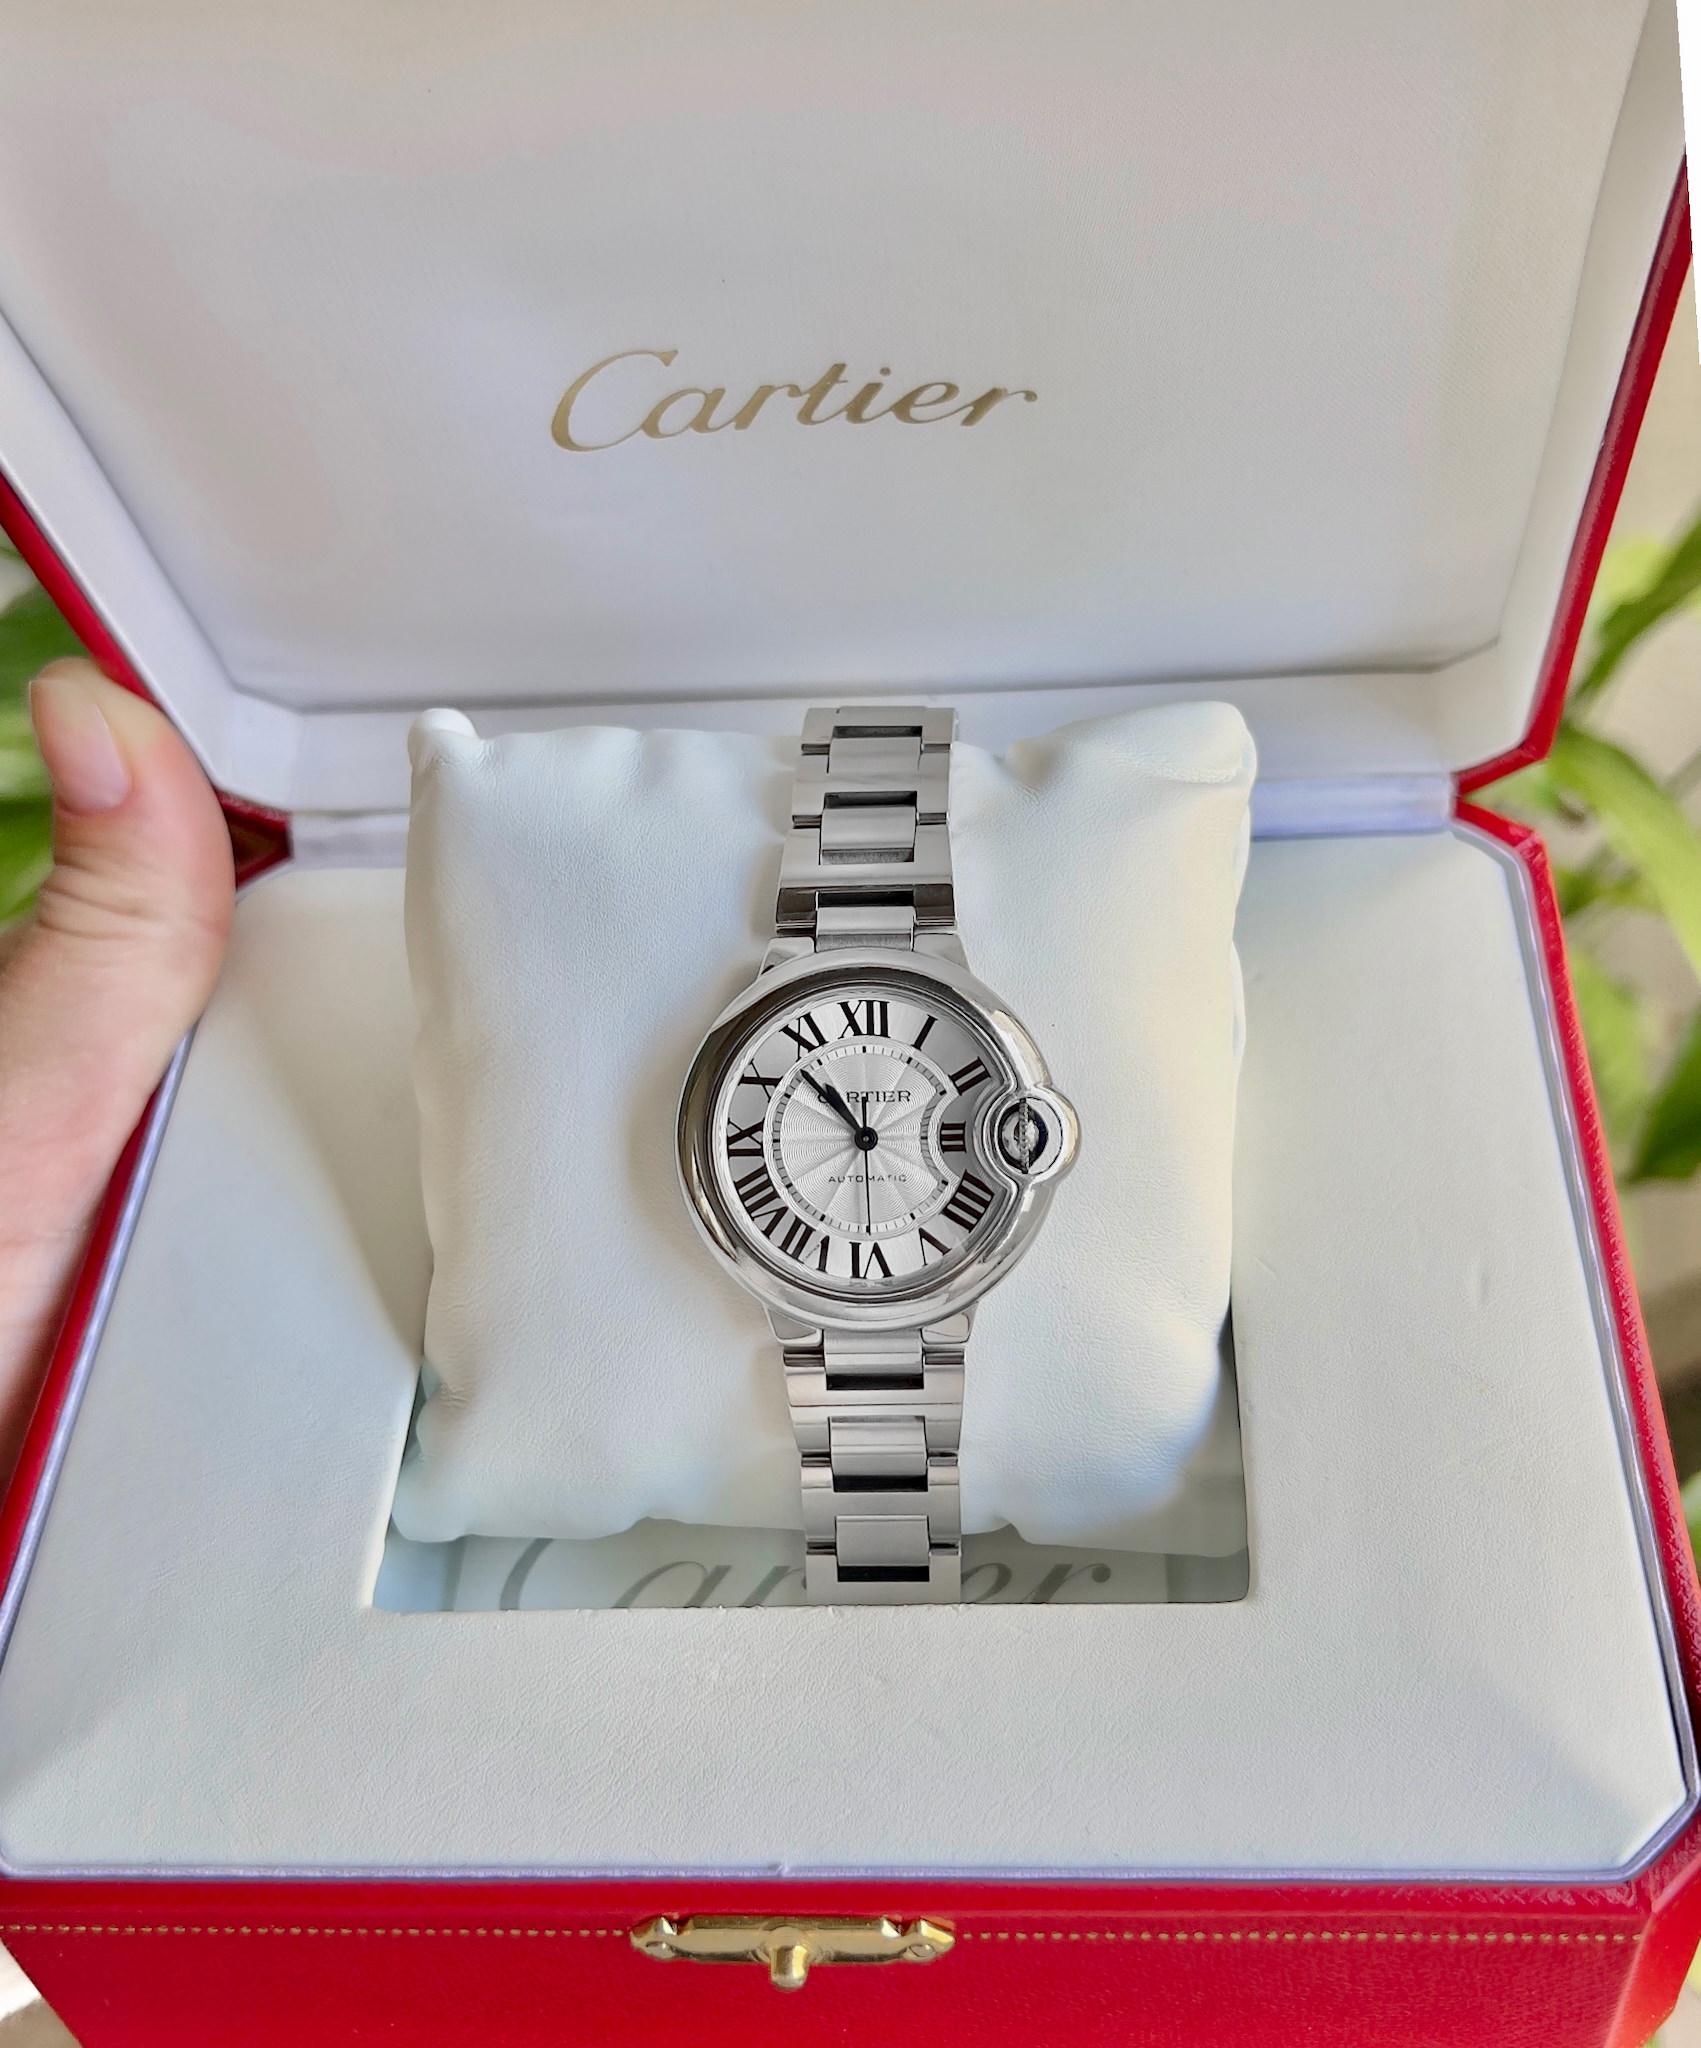 It comes with the authenticity certificate by GIA GG/AJP & Cartier Box
Condition: Excellent
Retail: $6,200
Brand: Cartier
Model: Ballon Bleu De Cartier
Movement: Automatic
Case Size: 33 mm
Metal: Stainless Steel
Water Resistant, Swiss Made
Bracelet